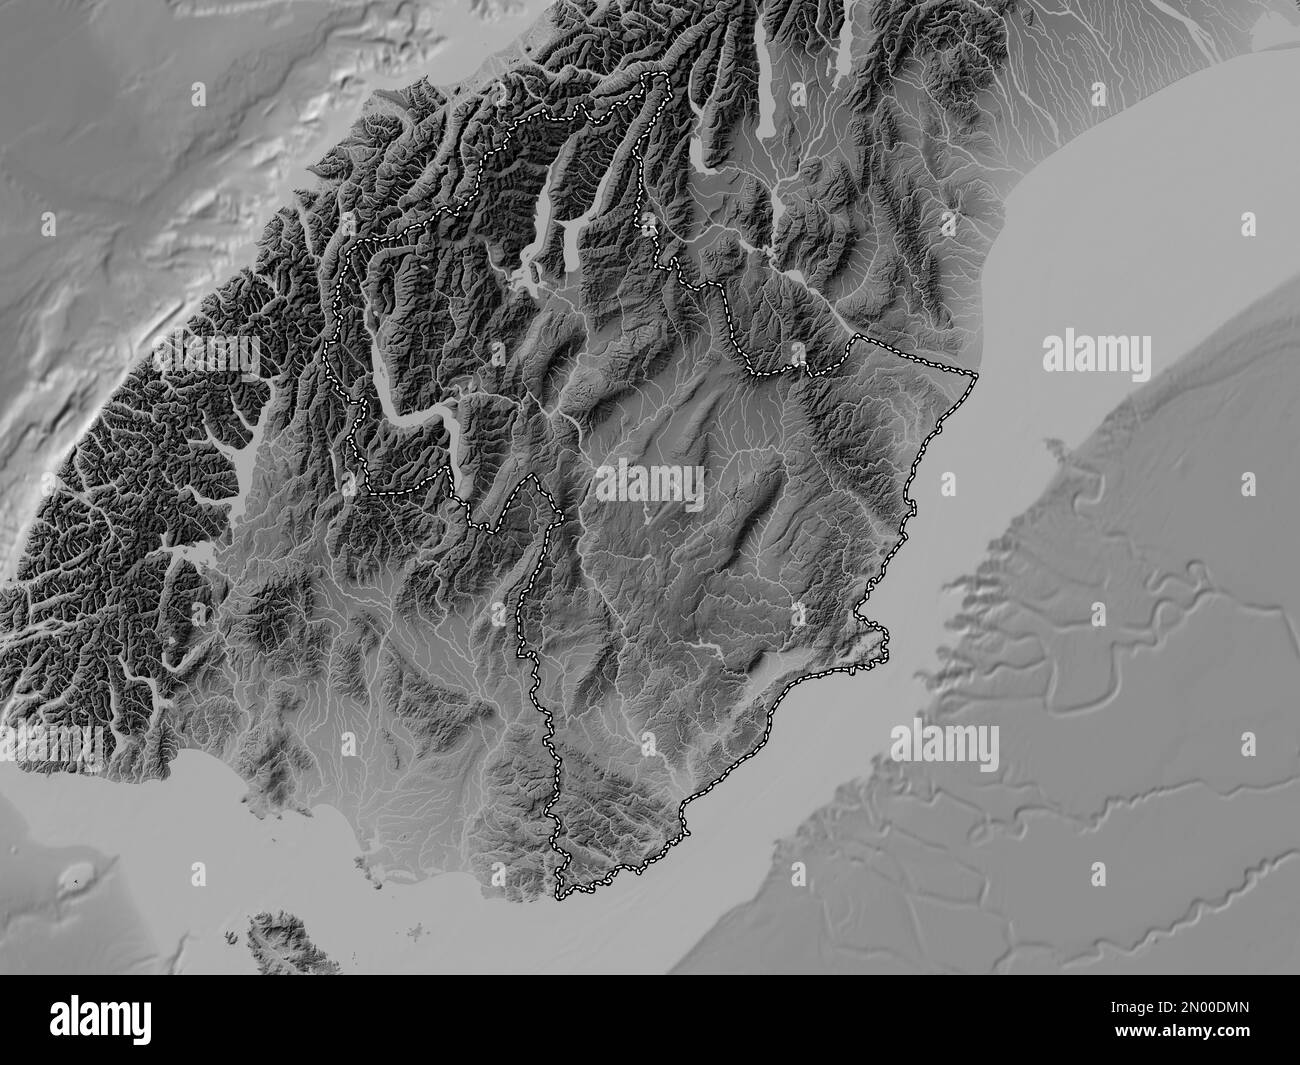 Otago, regional council of New Zealand. Grayscale elevation map with lakes and rivers Stock Photo